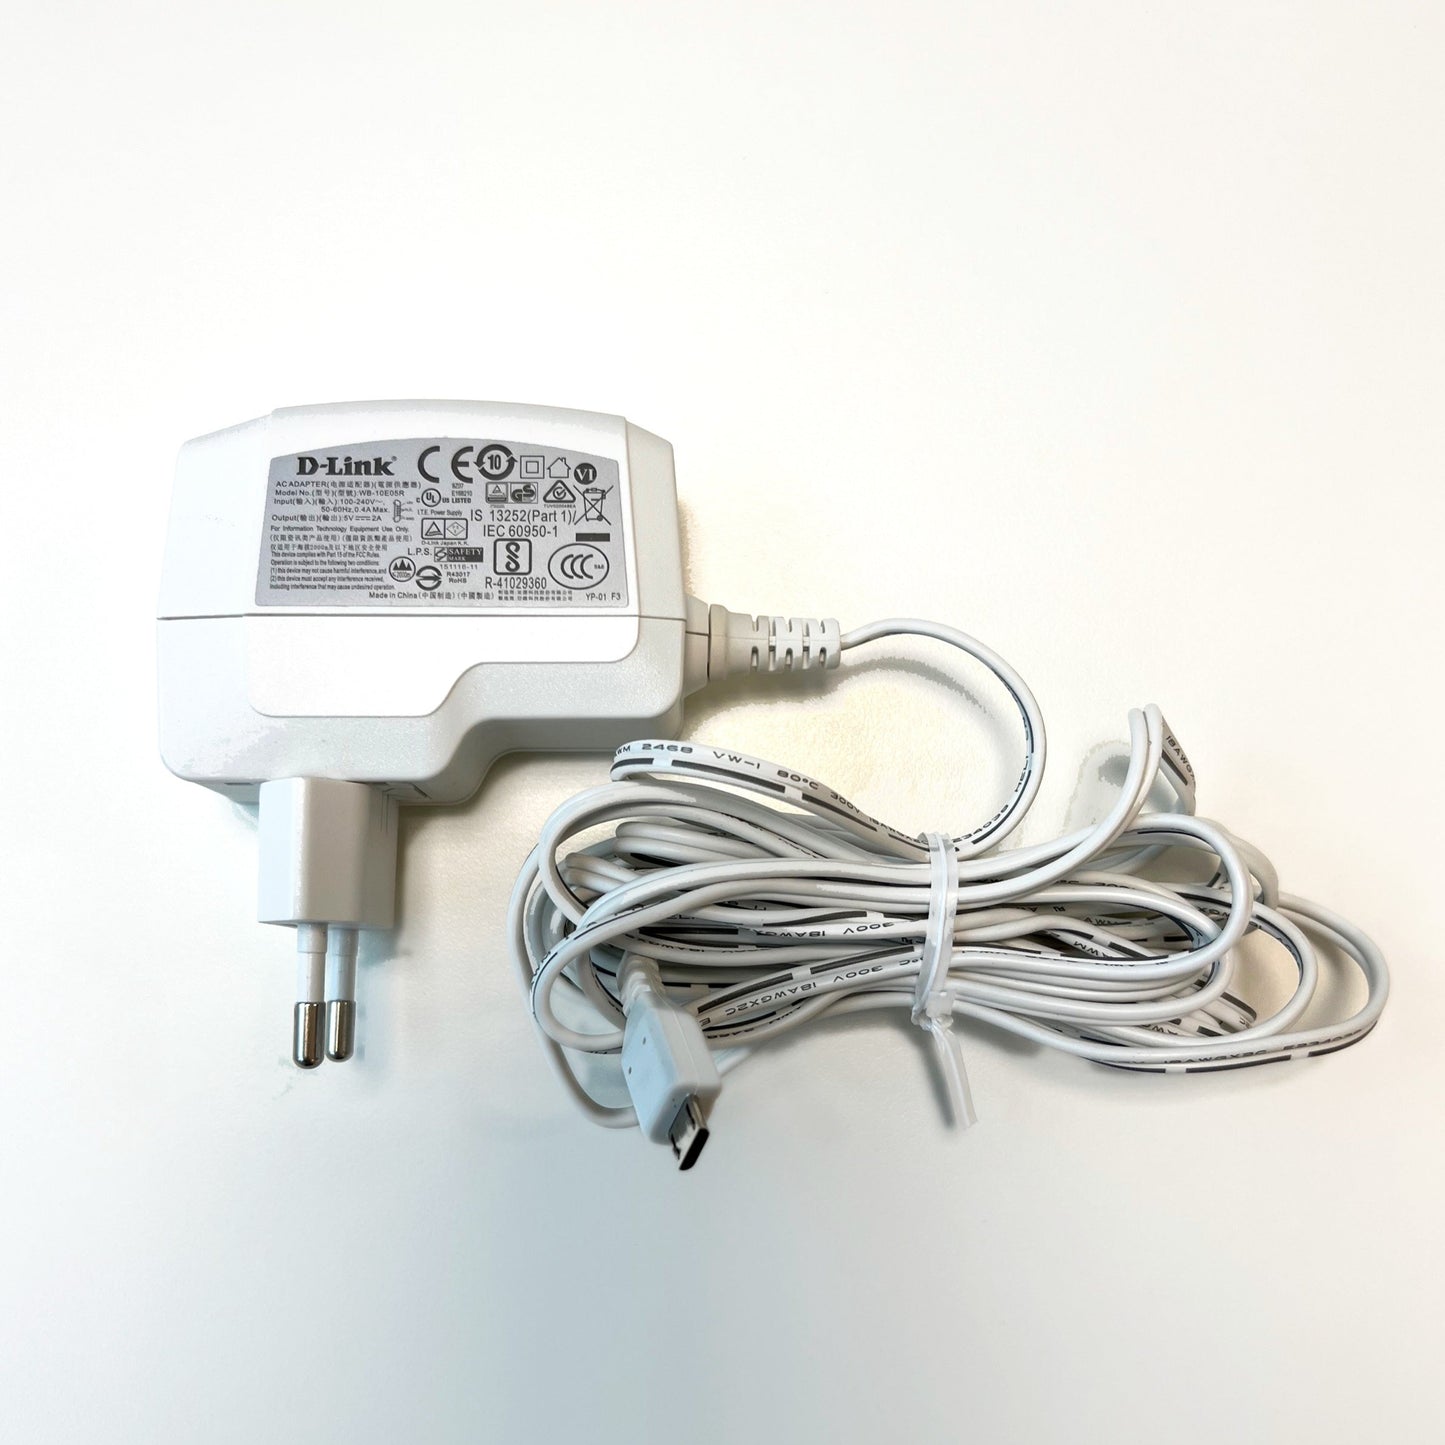 DCS-8525LH Power Adapter DC Output 5V,2A (Micro-USB) (HW/A1)